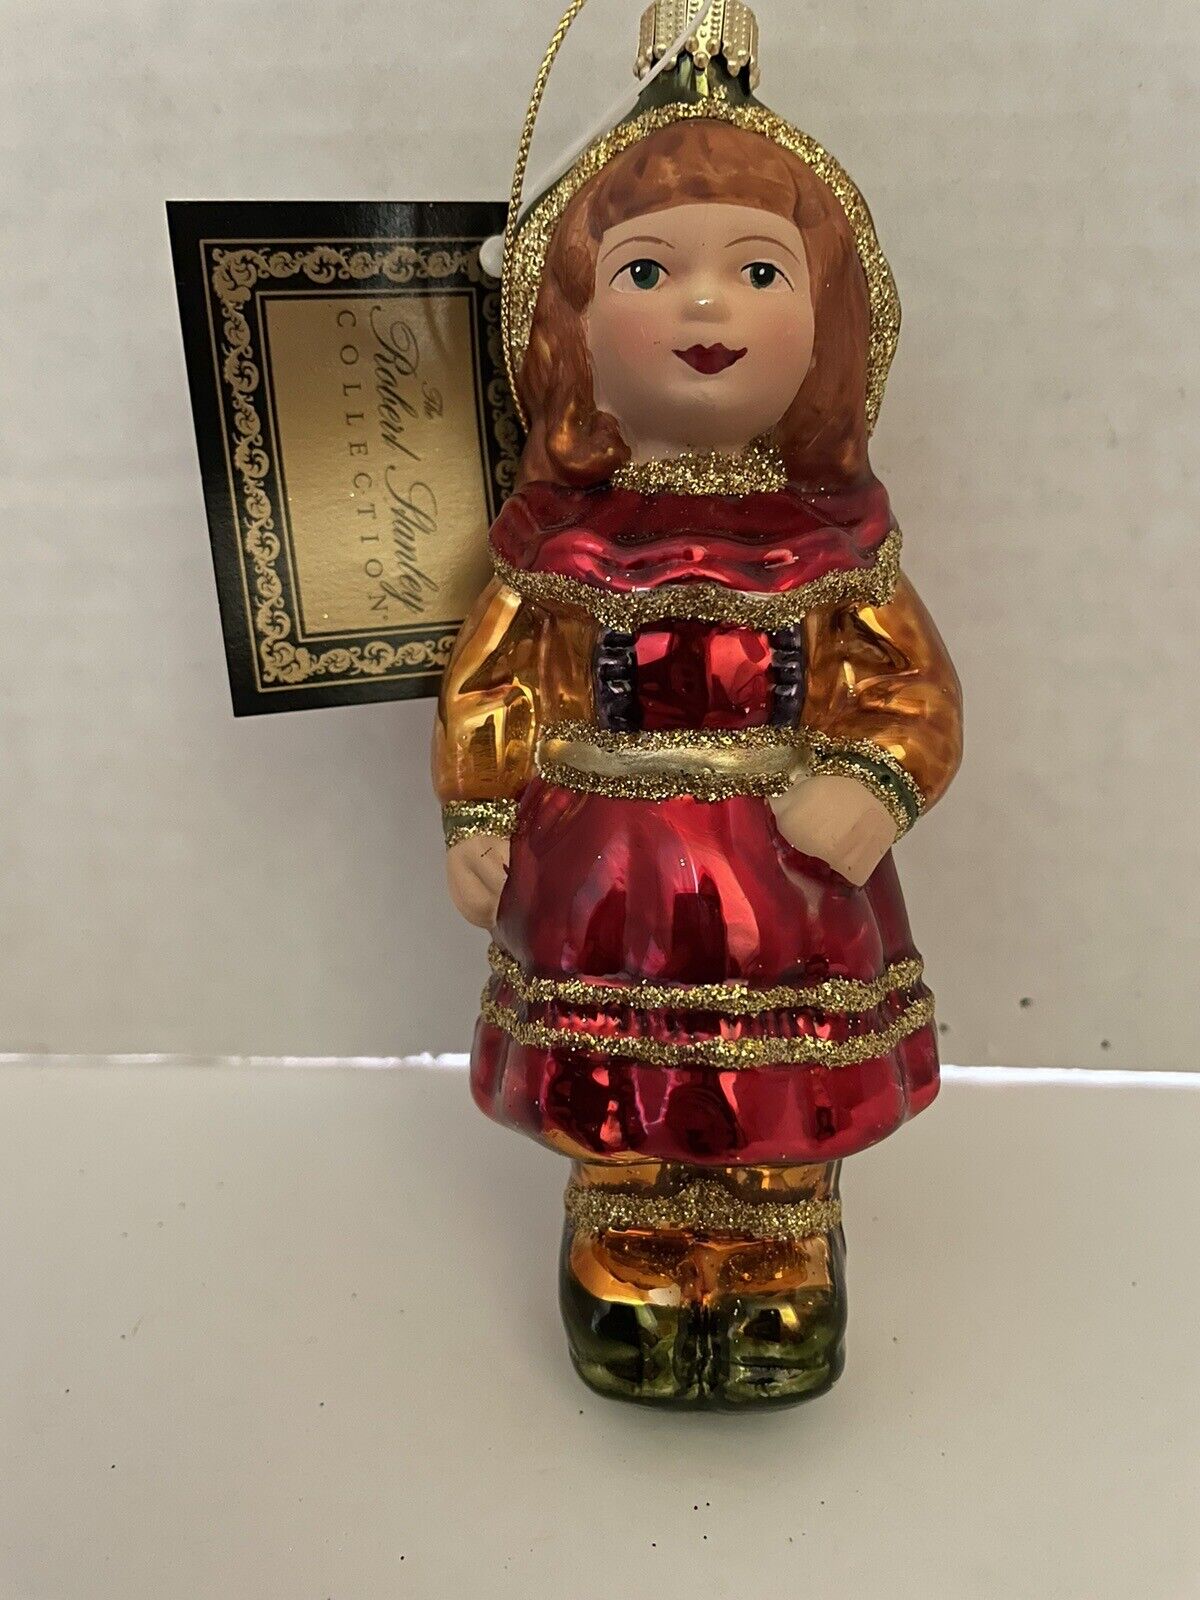 ROBERT STANLEY COLLECTION 2007 NWT GLASS 6” LITTLE GIRL DOLL CHRISTMAS ORNAMENT